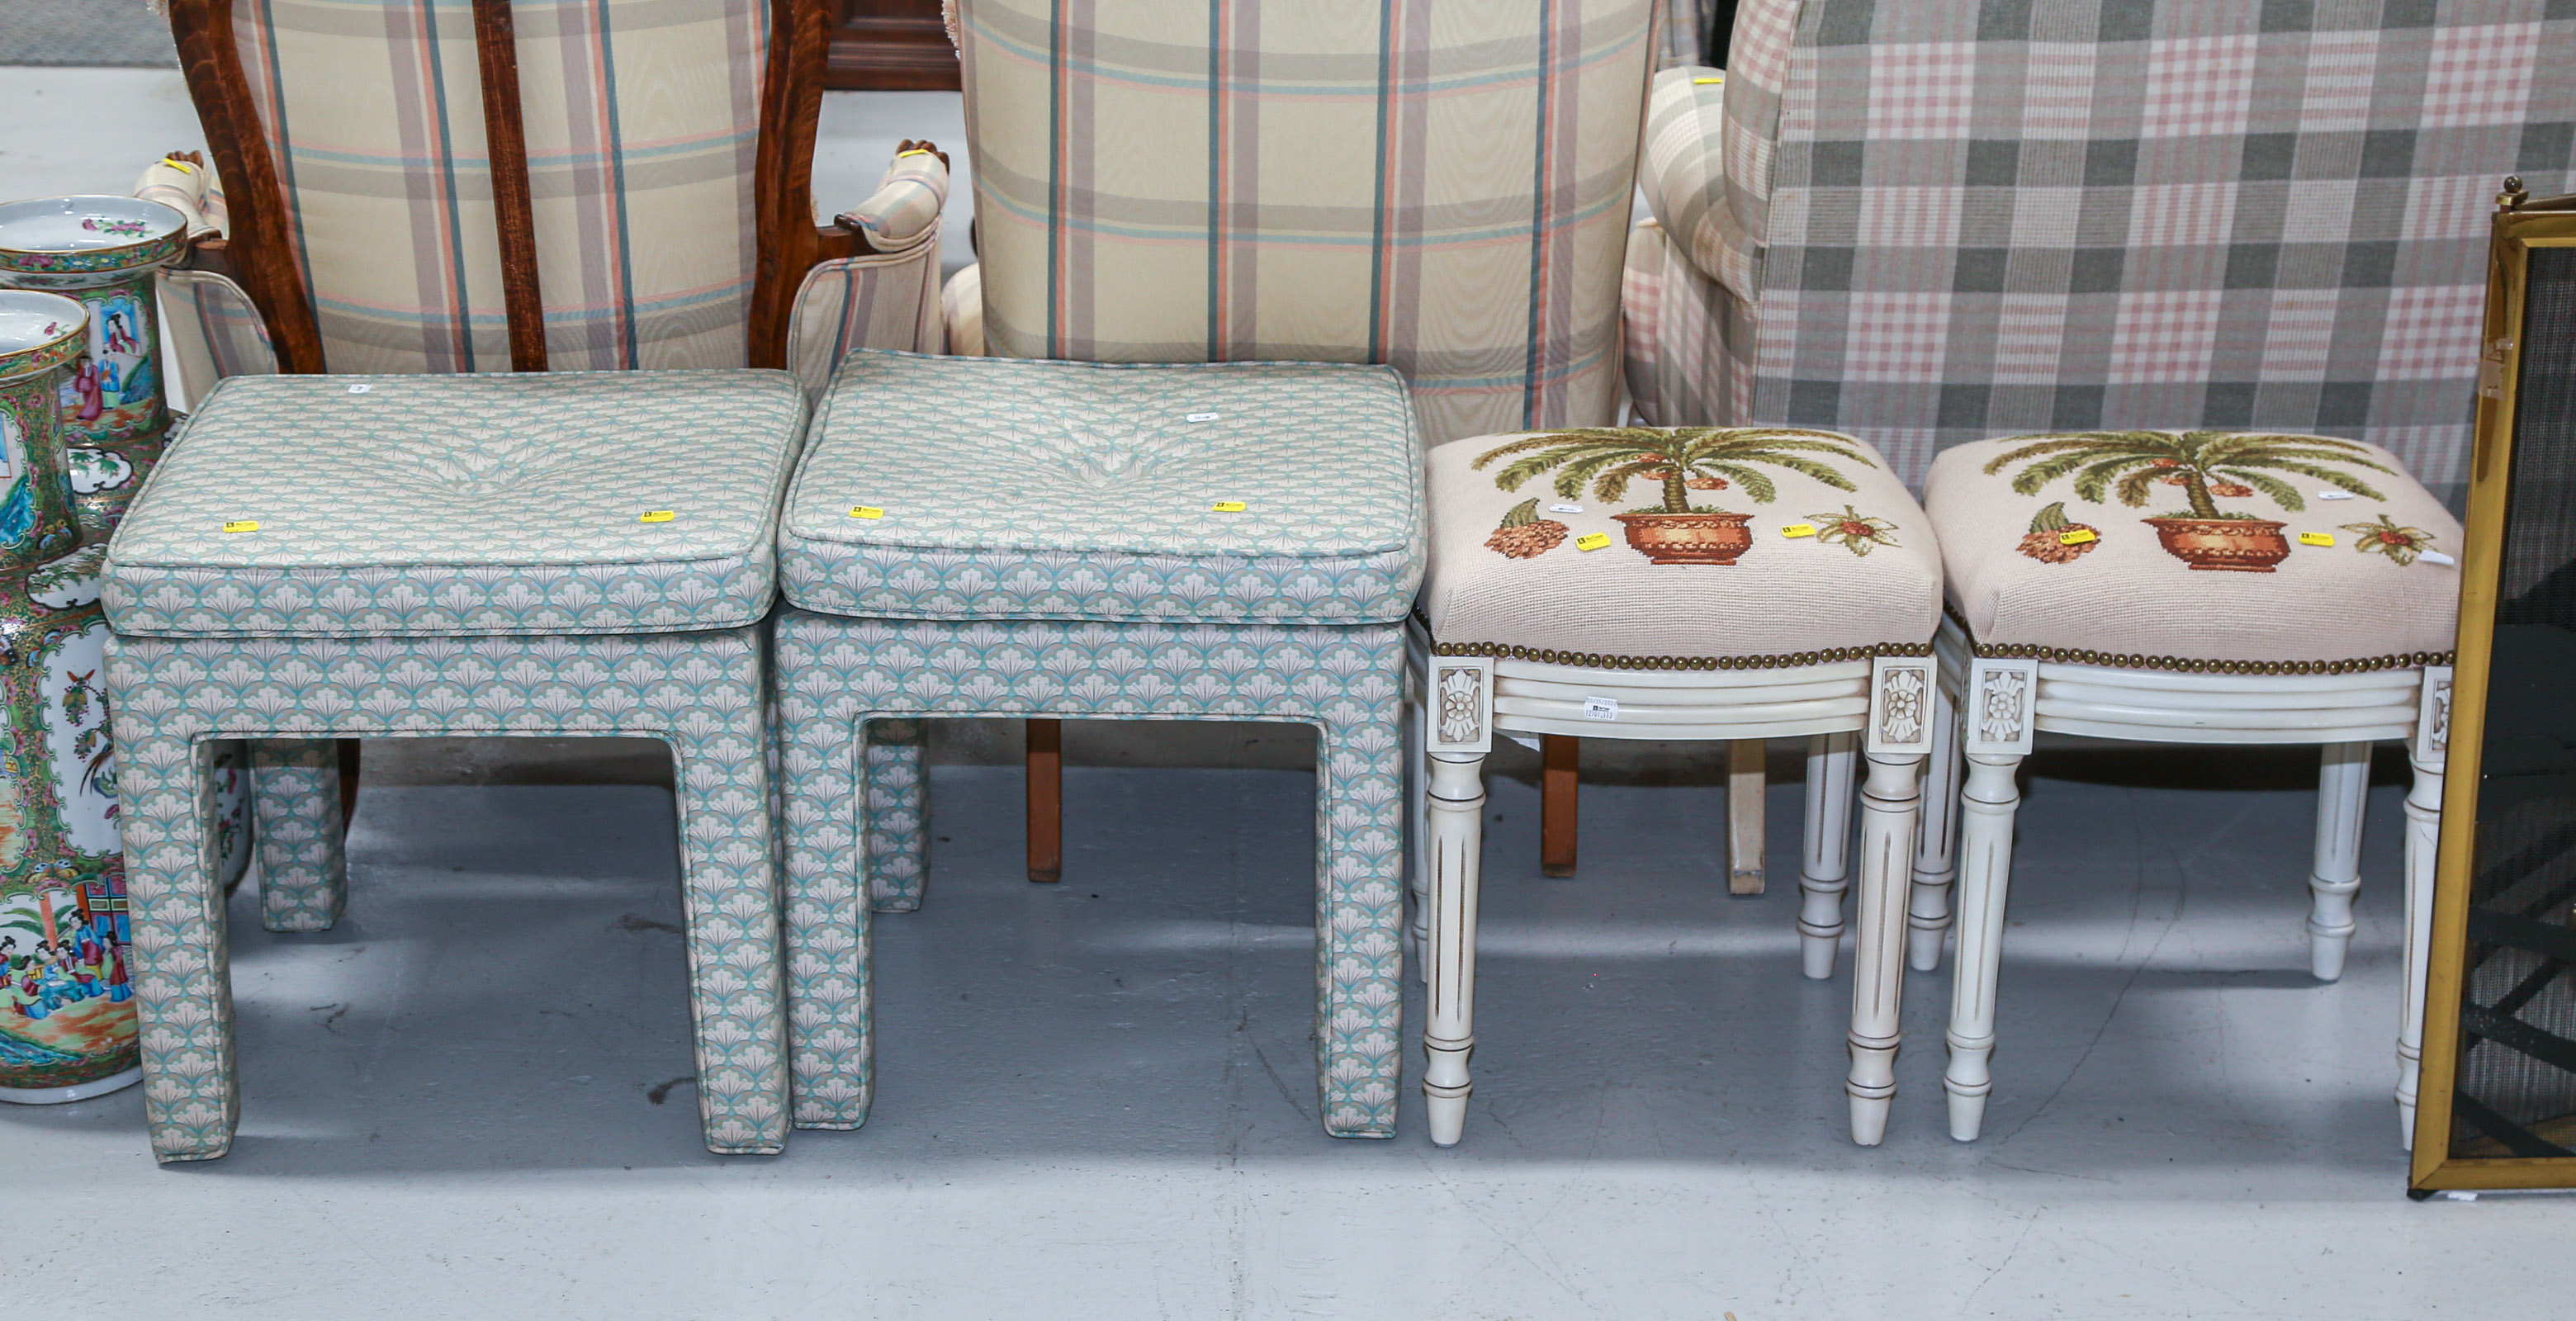 TWO PAIRS OF UPHOLSTERED STOOLS